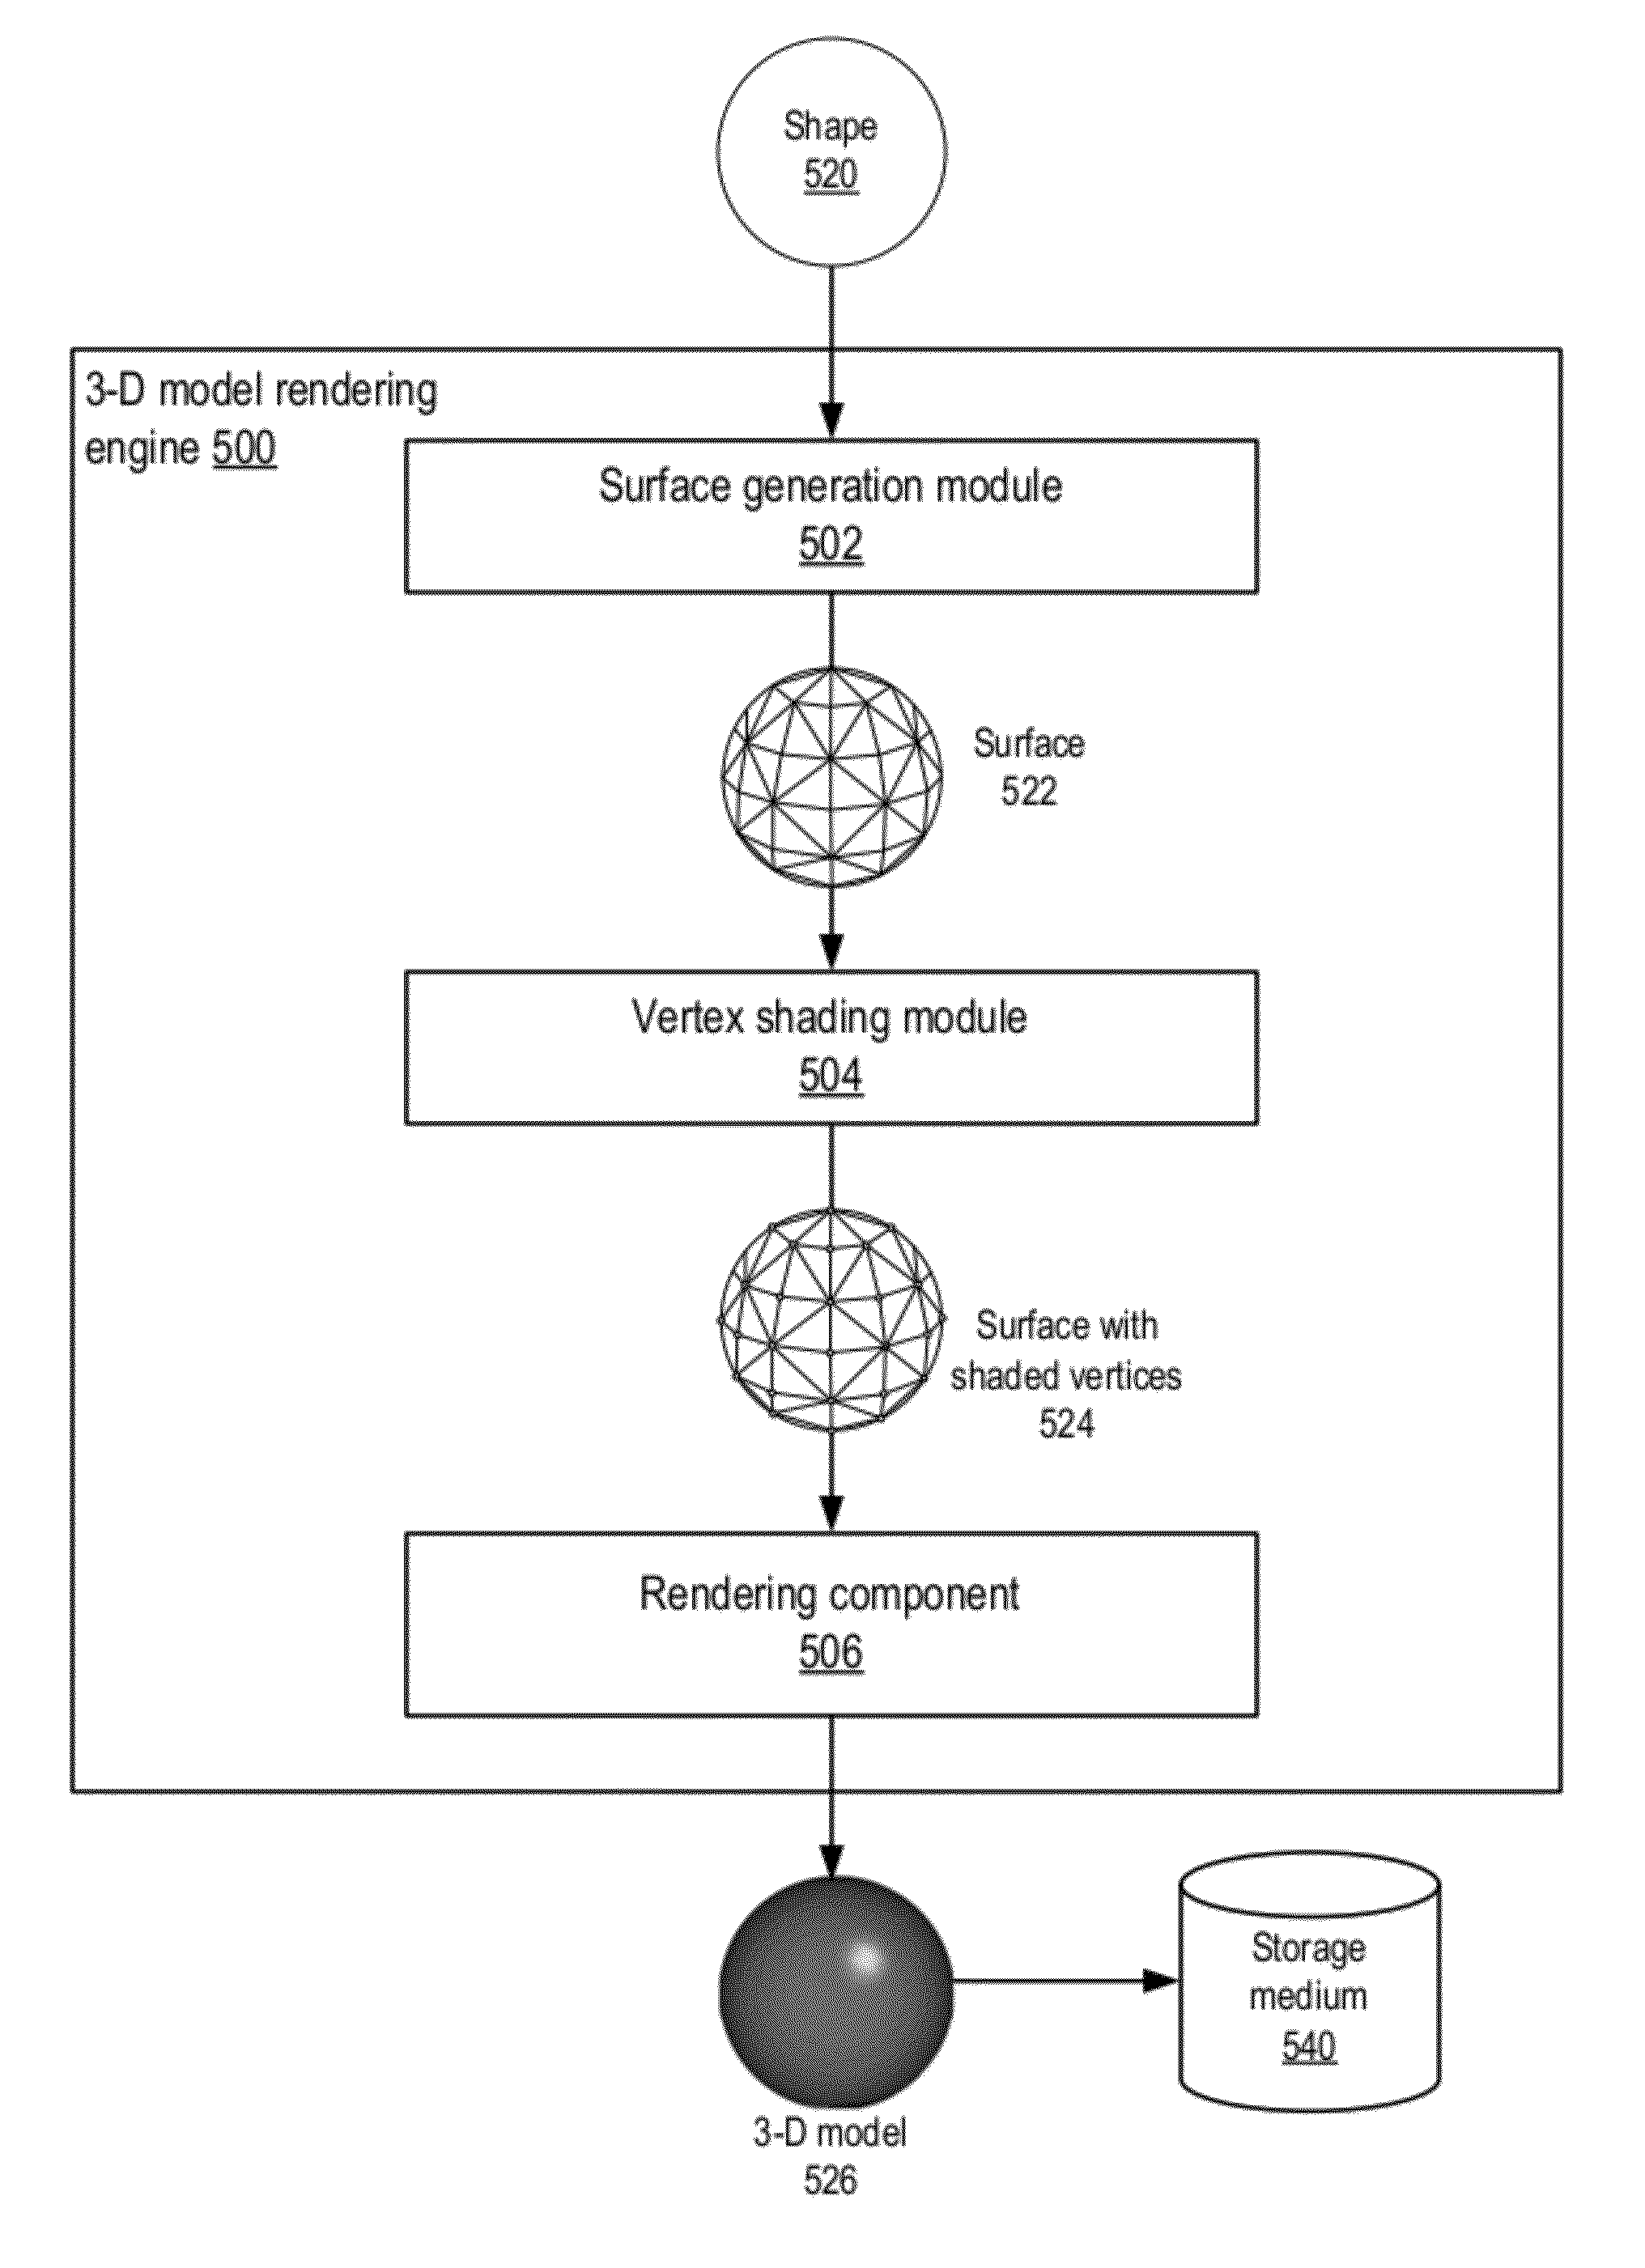 Method and apparatus for illuminating objects in 3-D computer graphics